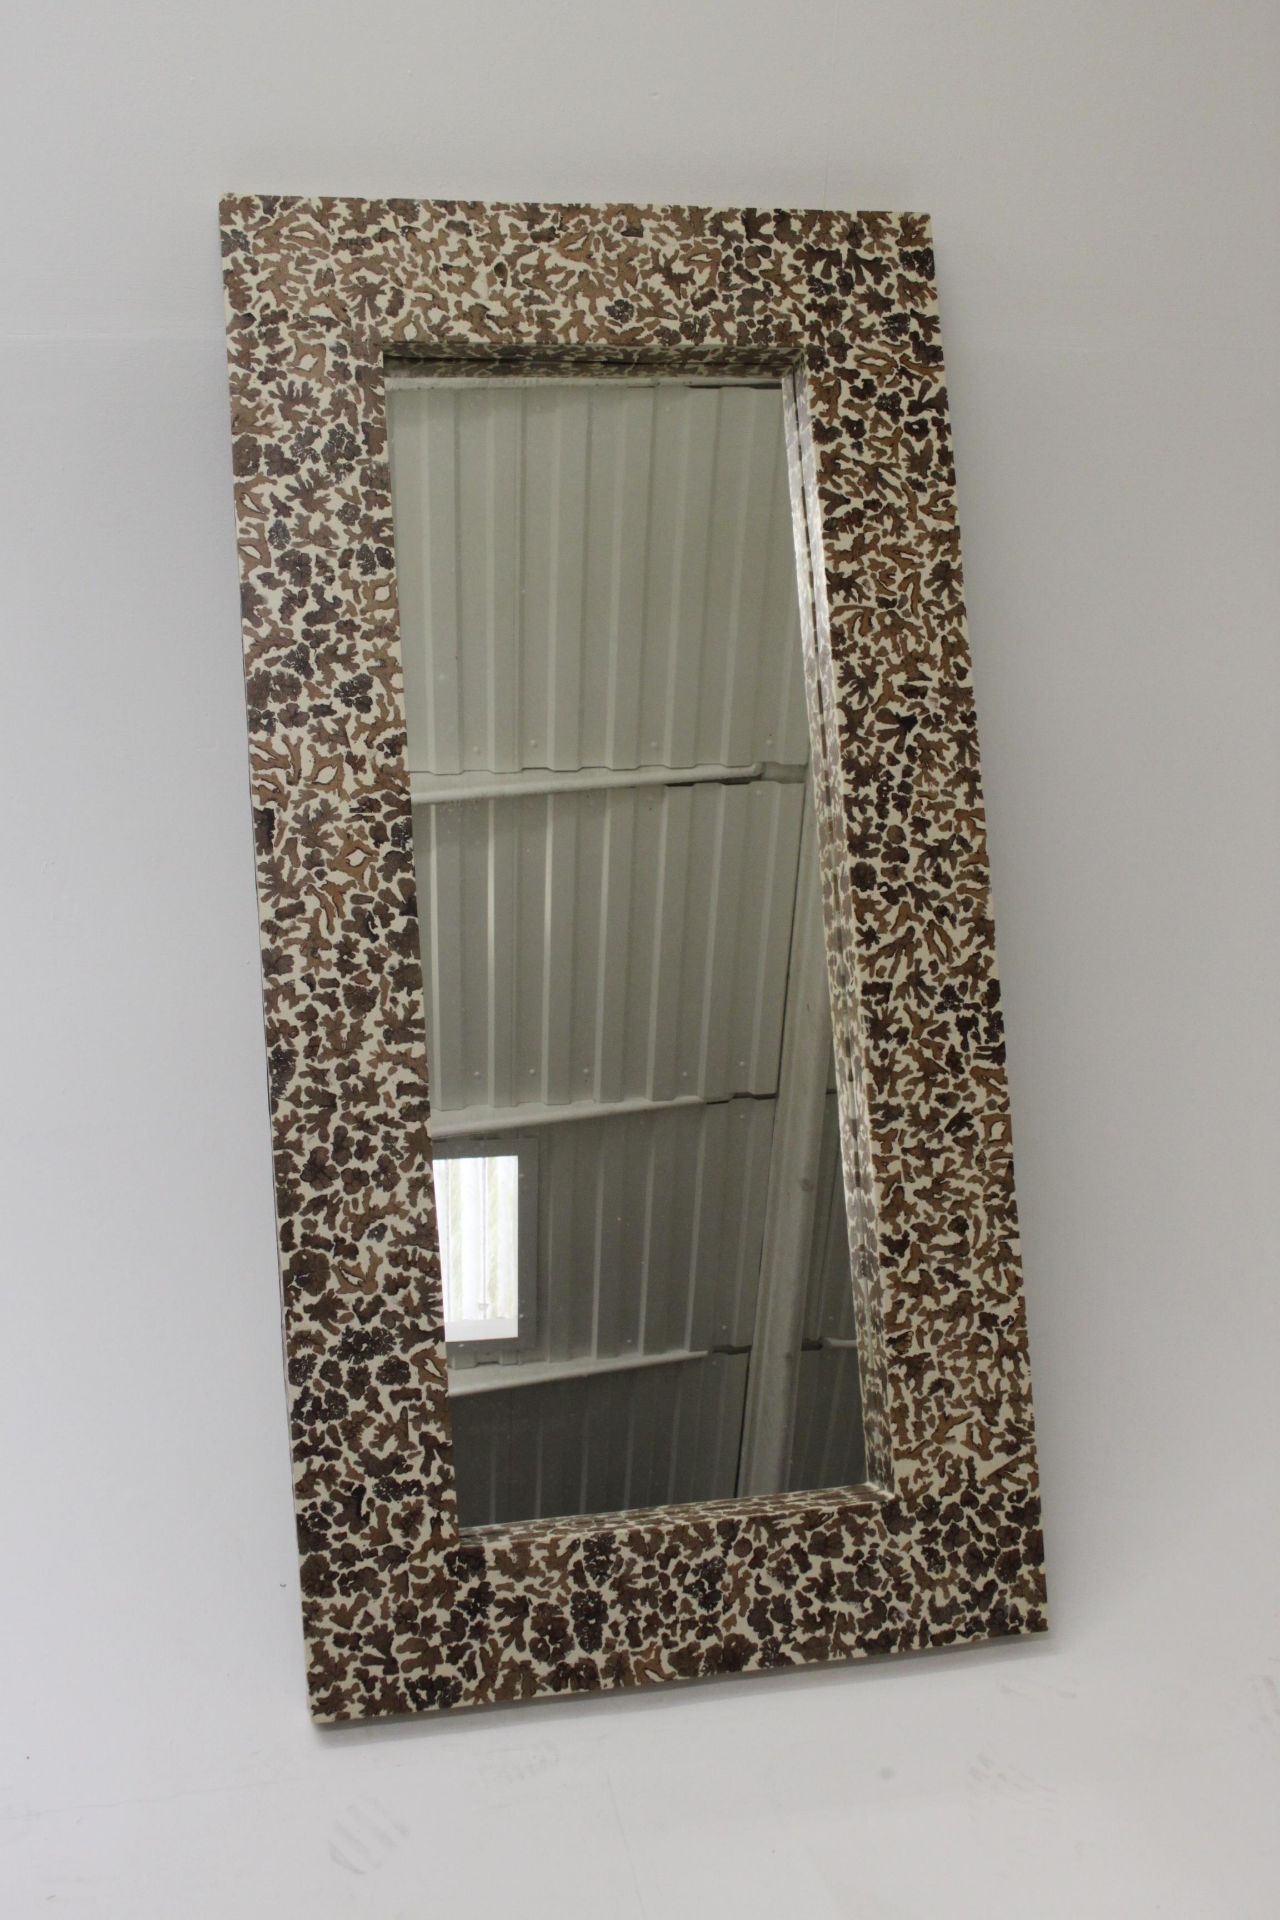 Full Length Resin Mirror Snakewood Motif Snakewood Gets Its Name From The Snake Like Markings It - Image 3 of 3